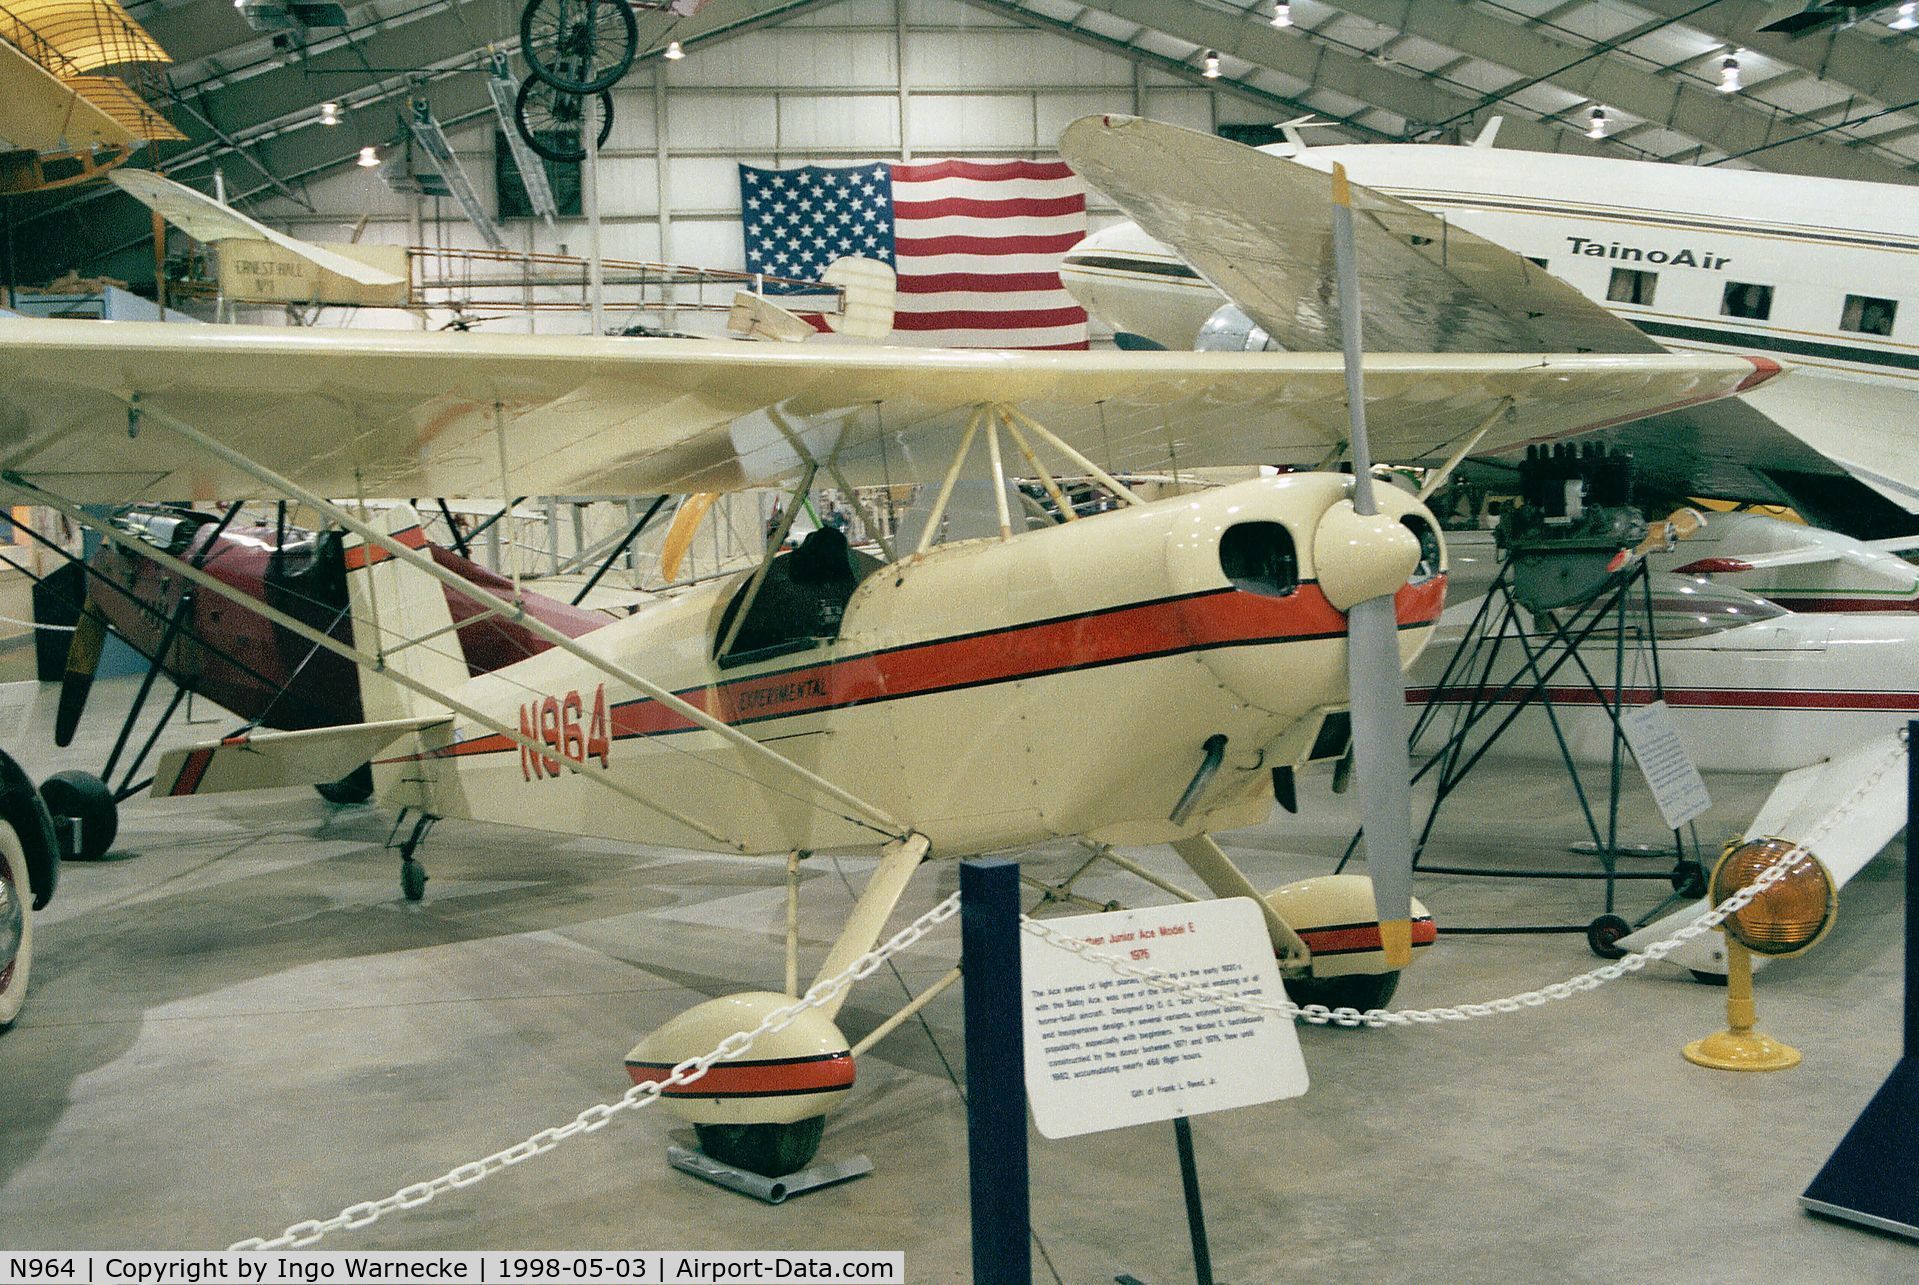 N964, 1976 Corben Junior Ace Model E C/N 164, Reed Corben Junior Ace Model E at the New England Air Museum, Windsor Locks CT